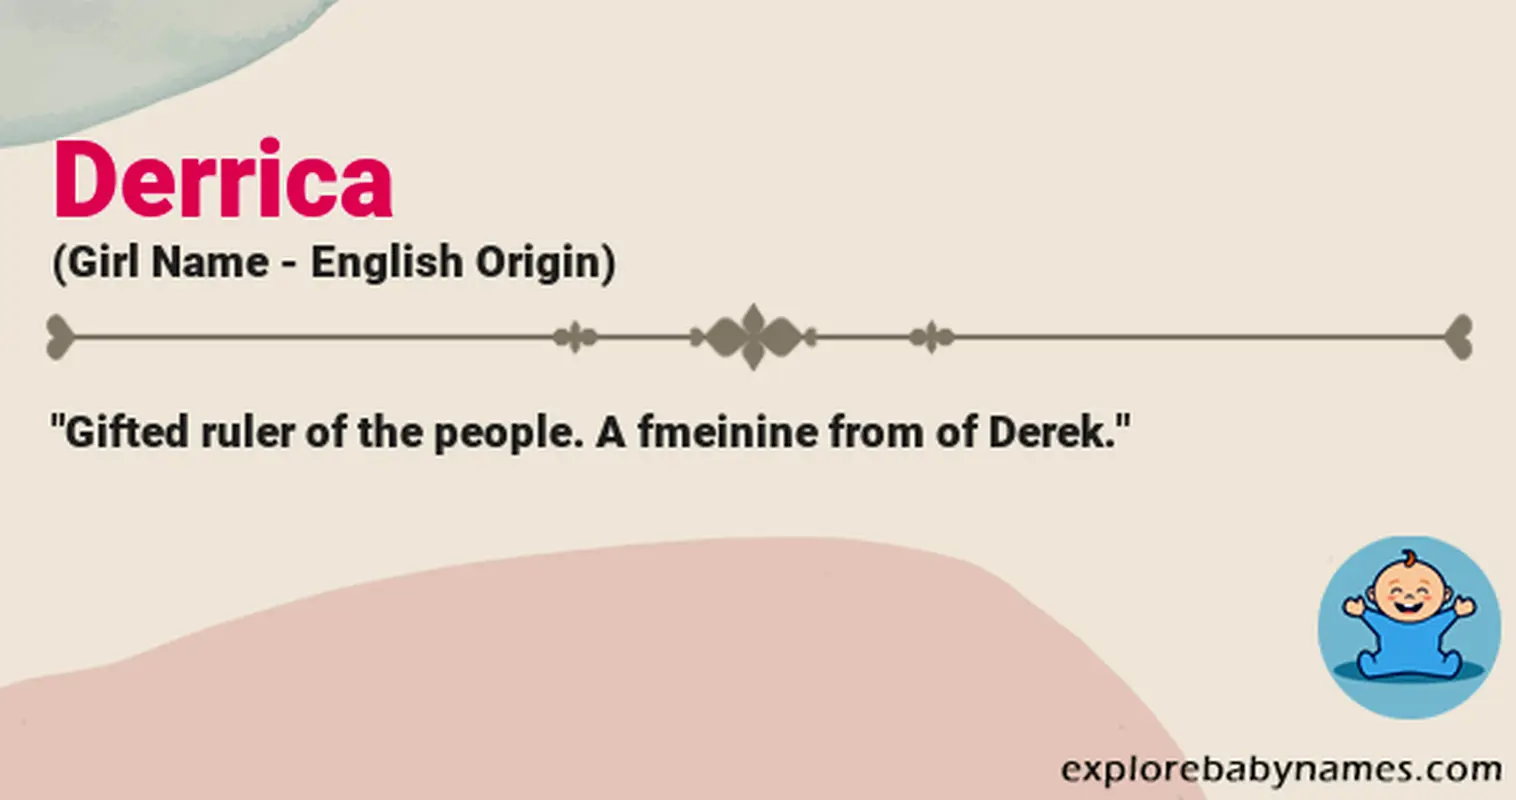 Meaning of Derrica